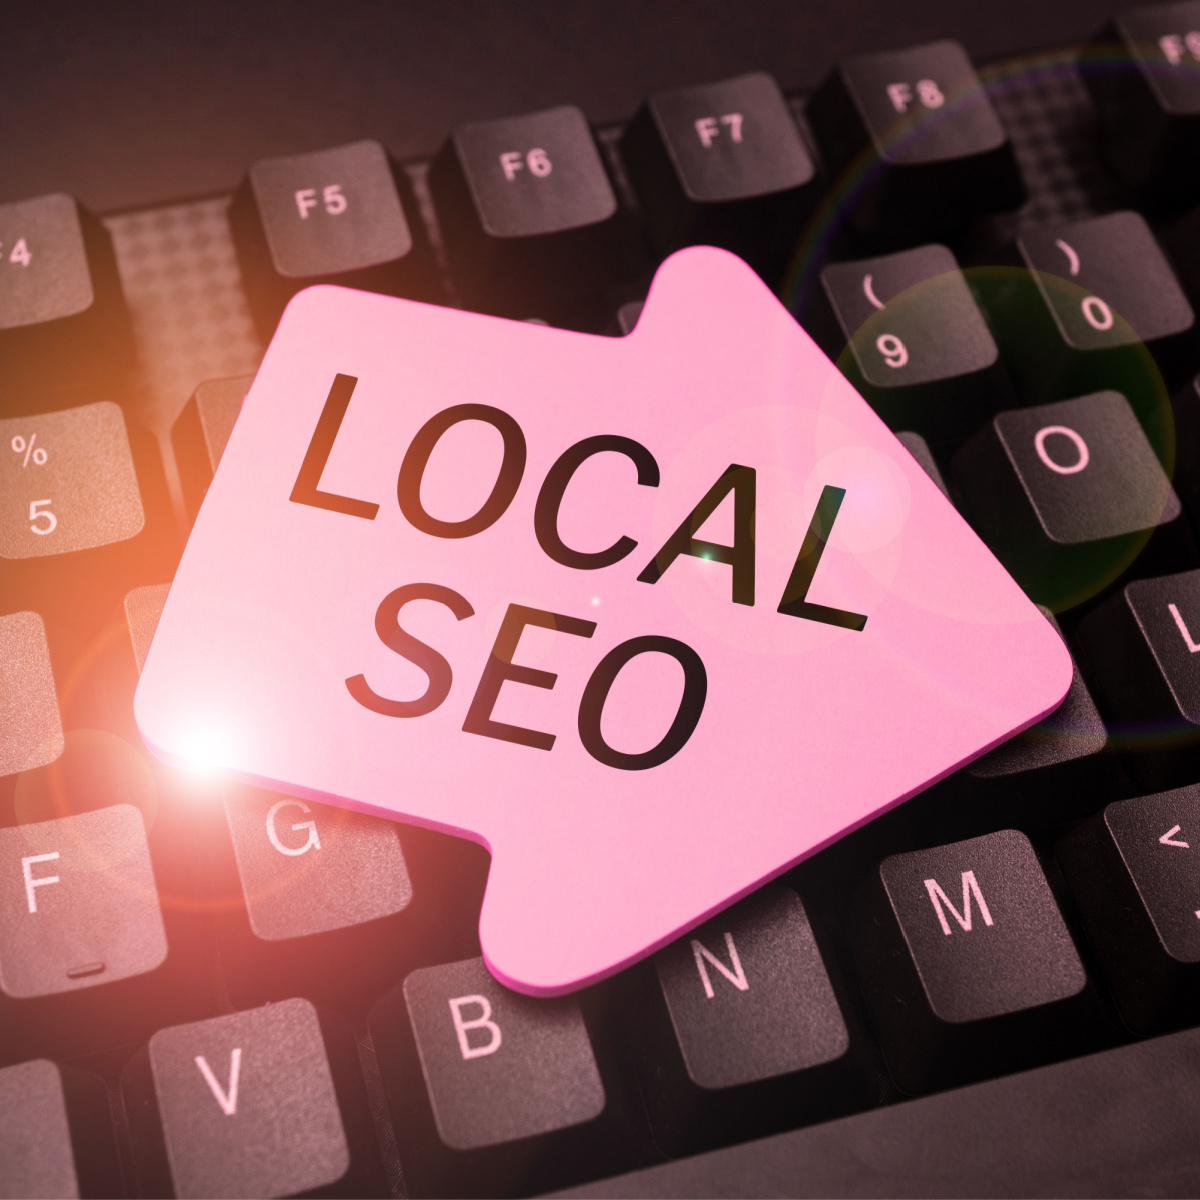 Local SEO is a potent tool that Houston digital marketing experts rely on.